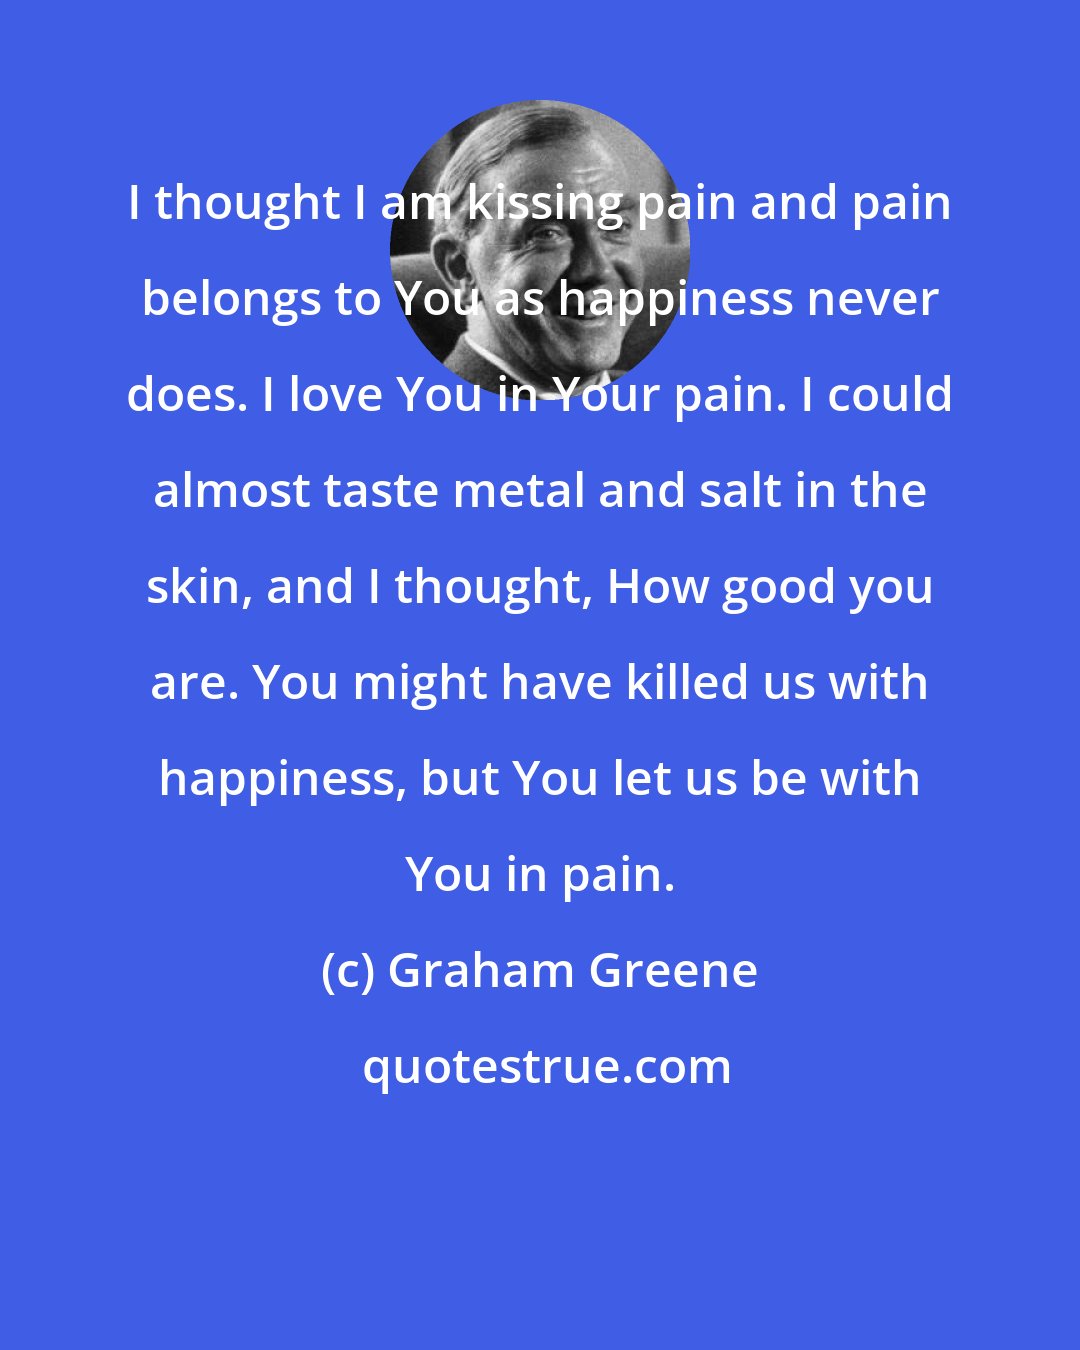 Graham Greene: I thought I am kissing pain and pain belongs to You as happiness never does. I love You in Your pain. I could almost taste metal and salt in the skin, and I thought, How good you are. You might have killed us with happiness, but You let us be with You in pain.